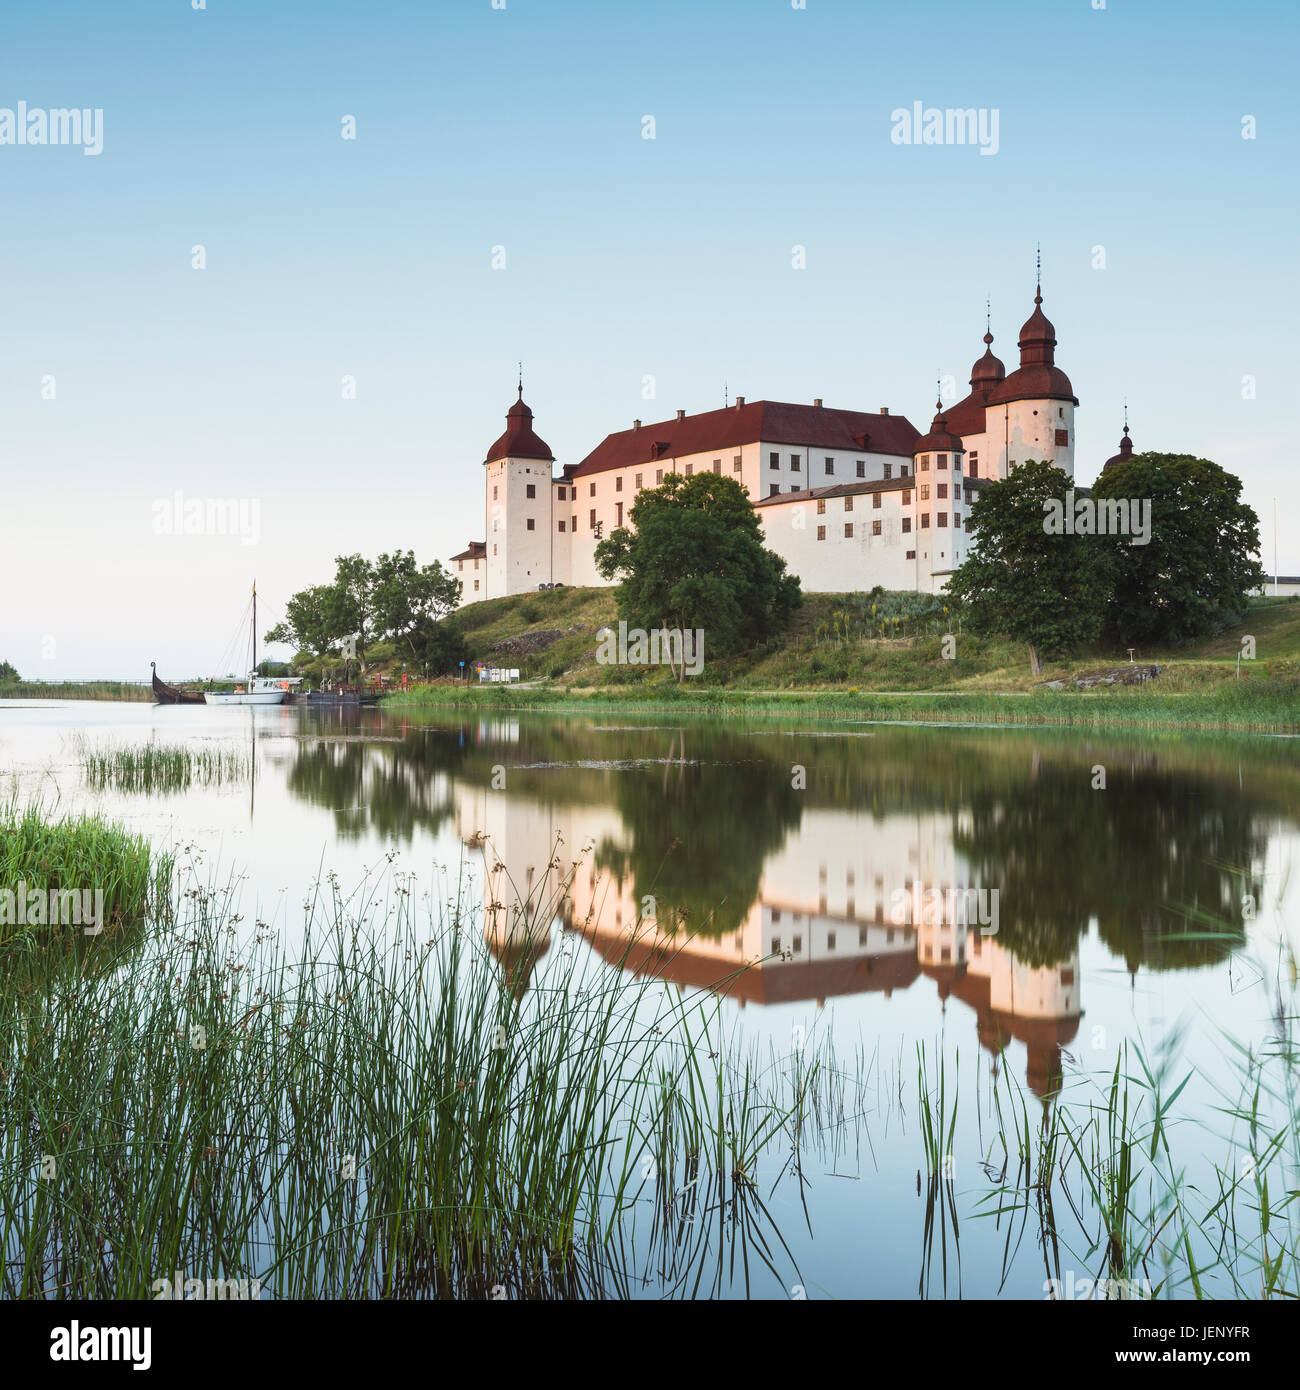 Castle reflecting in water Stock Photo